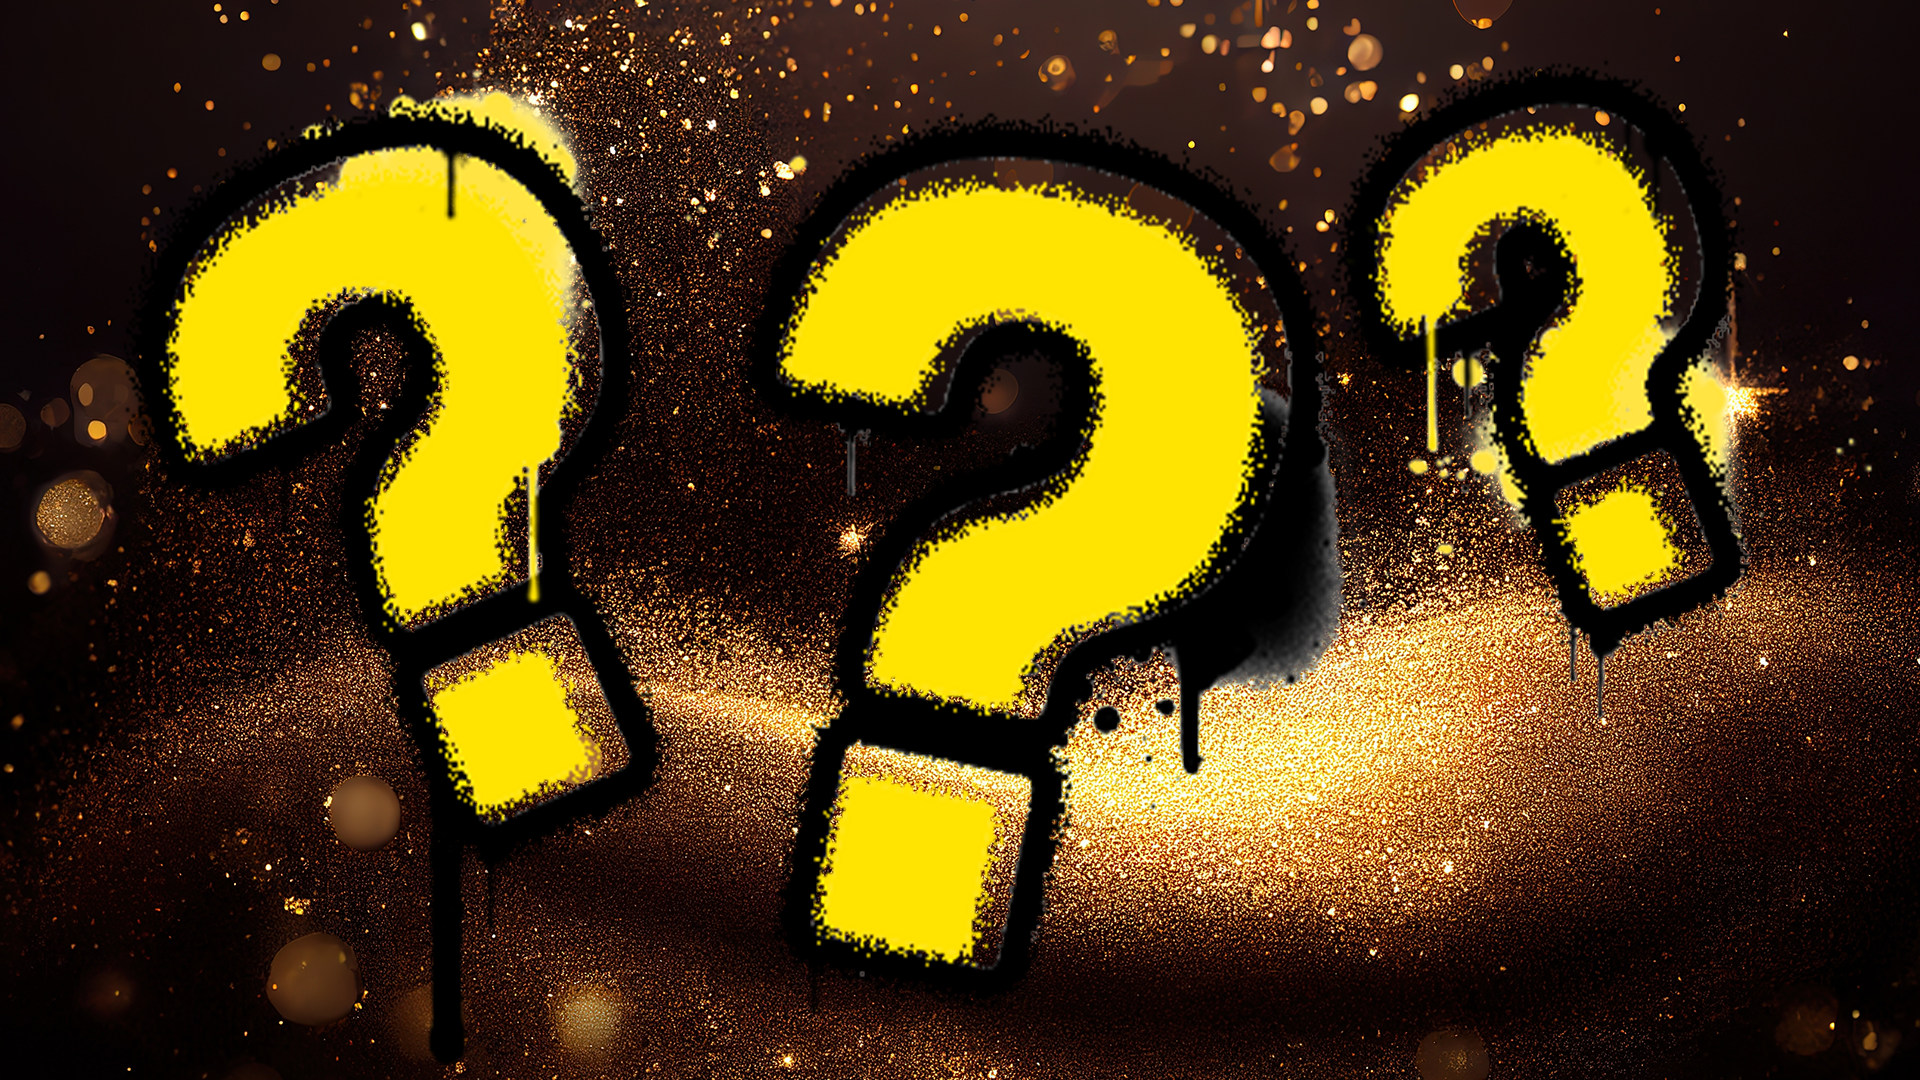 Golden dust background with question marks